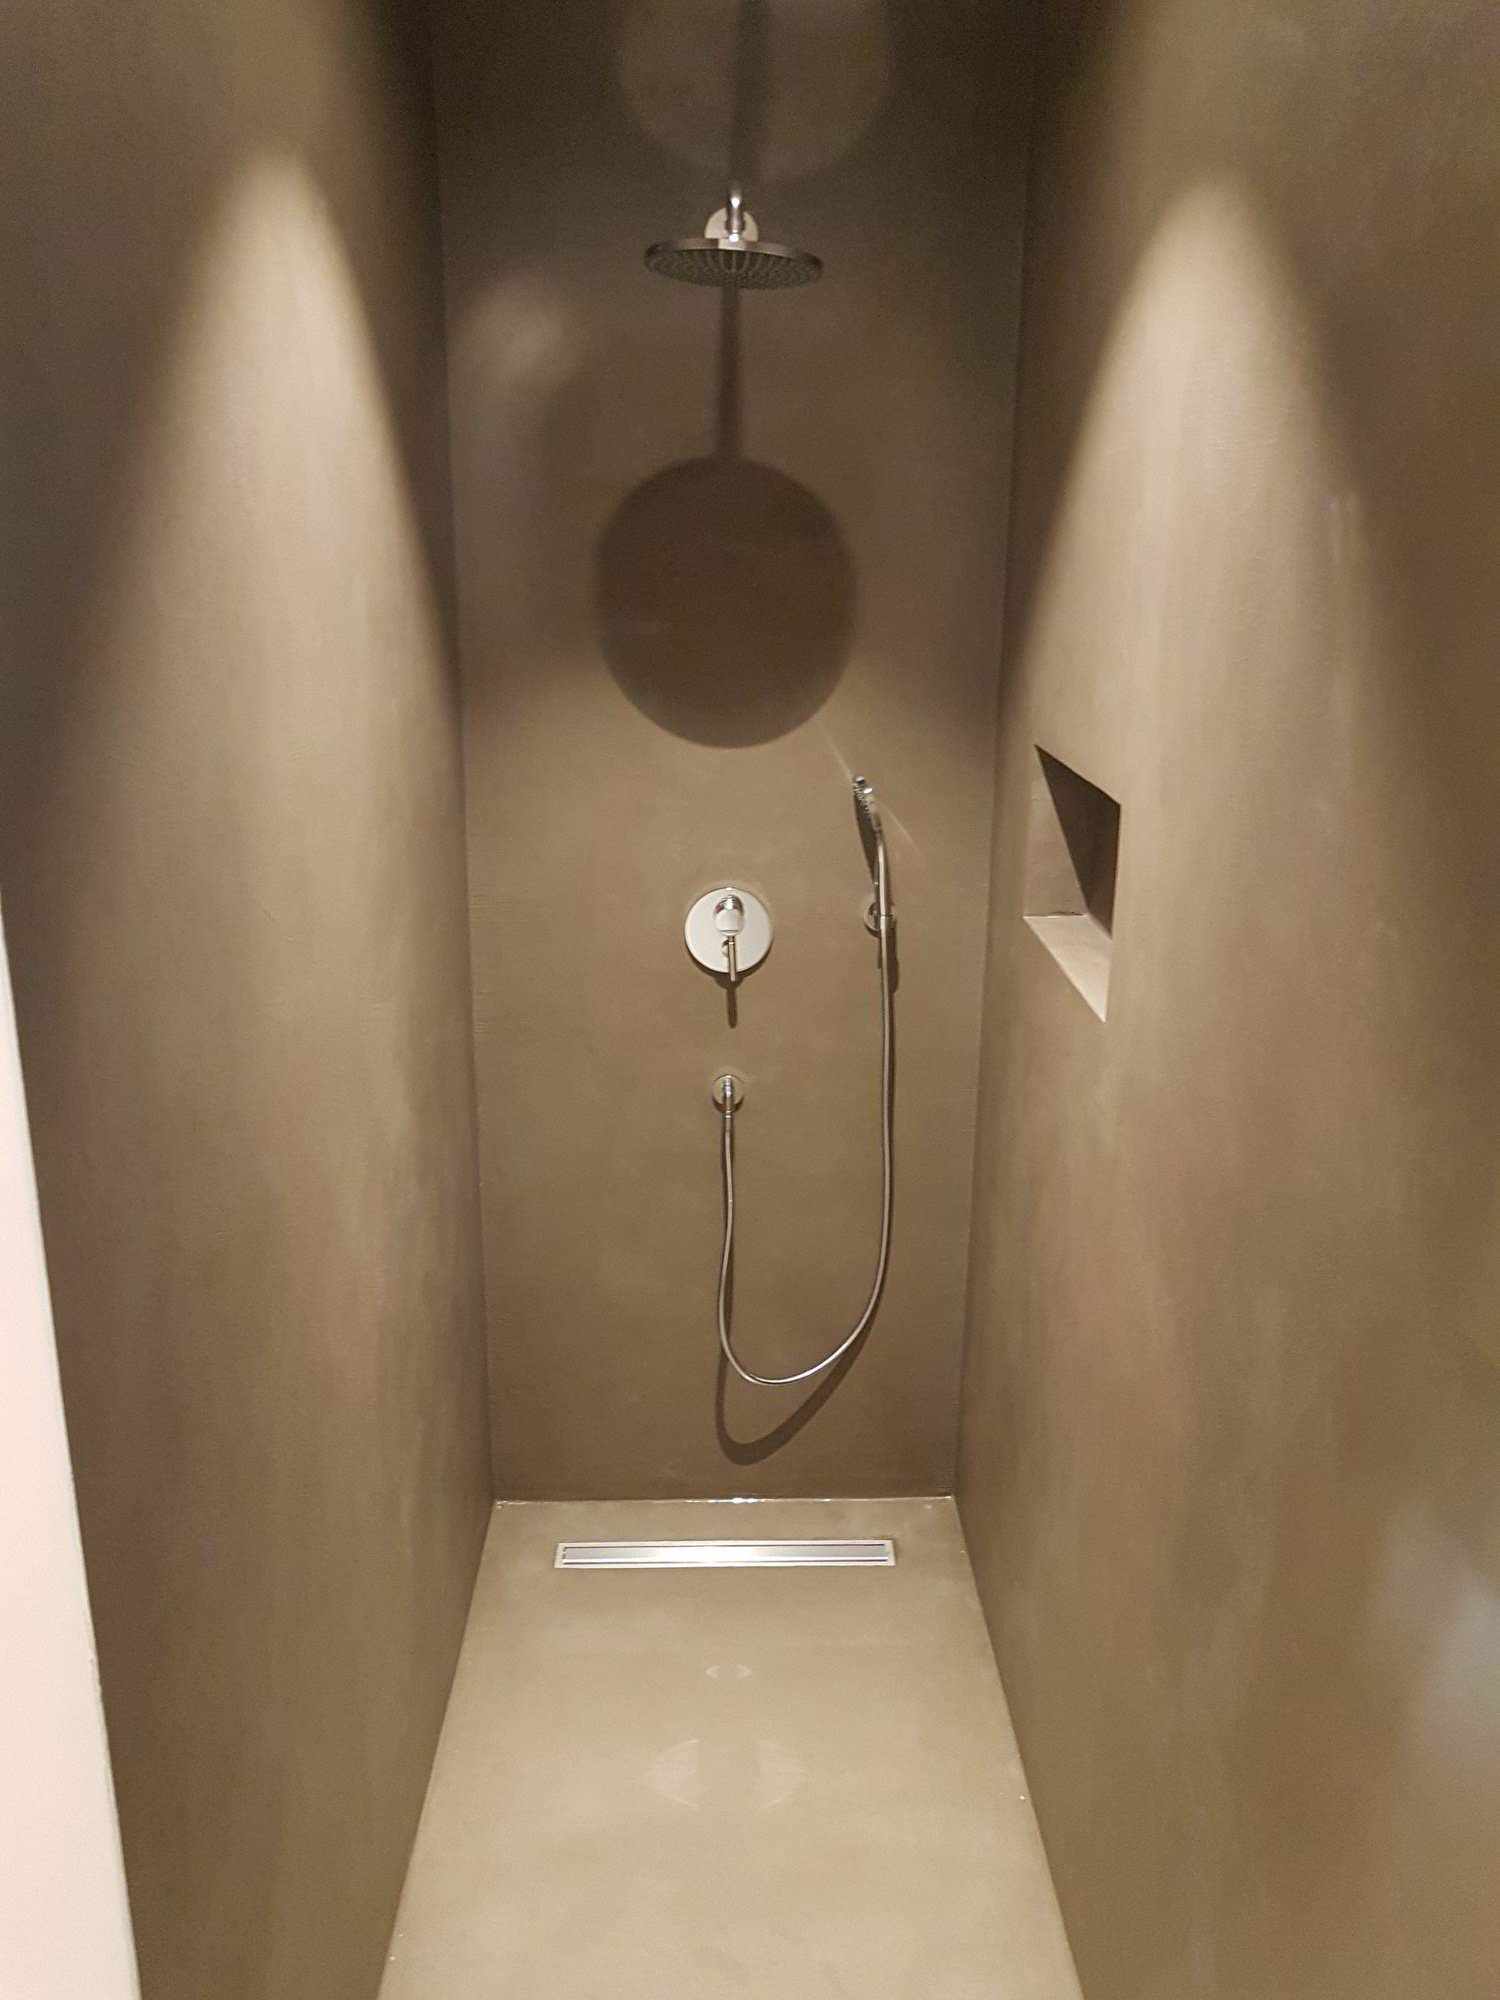 Light microcement coating on shower walls and floor